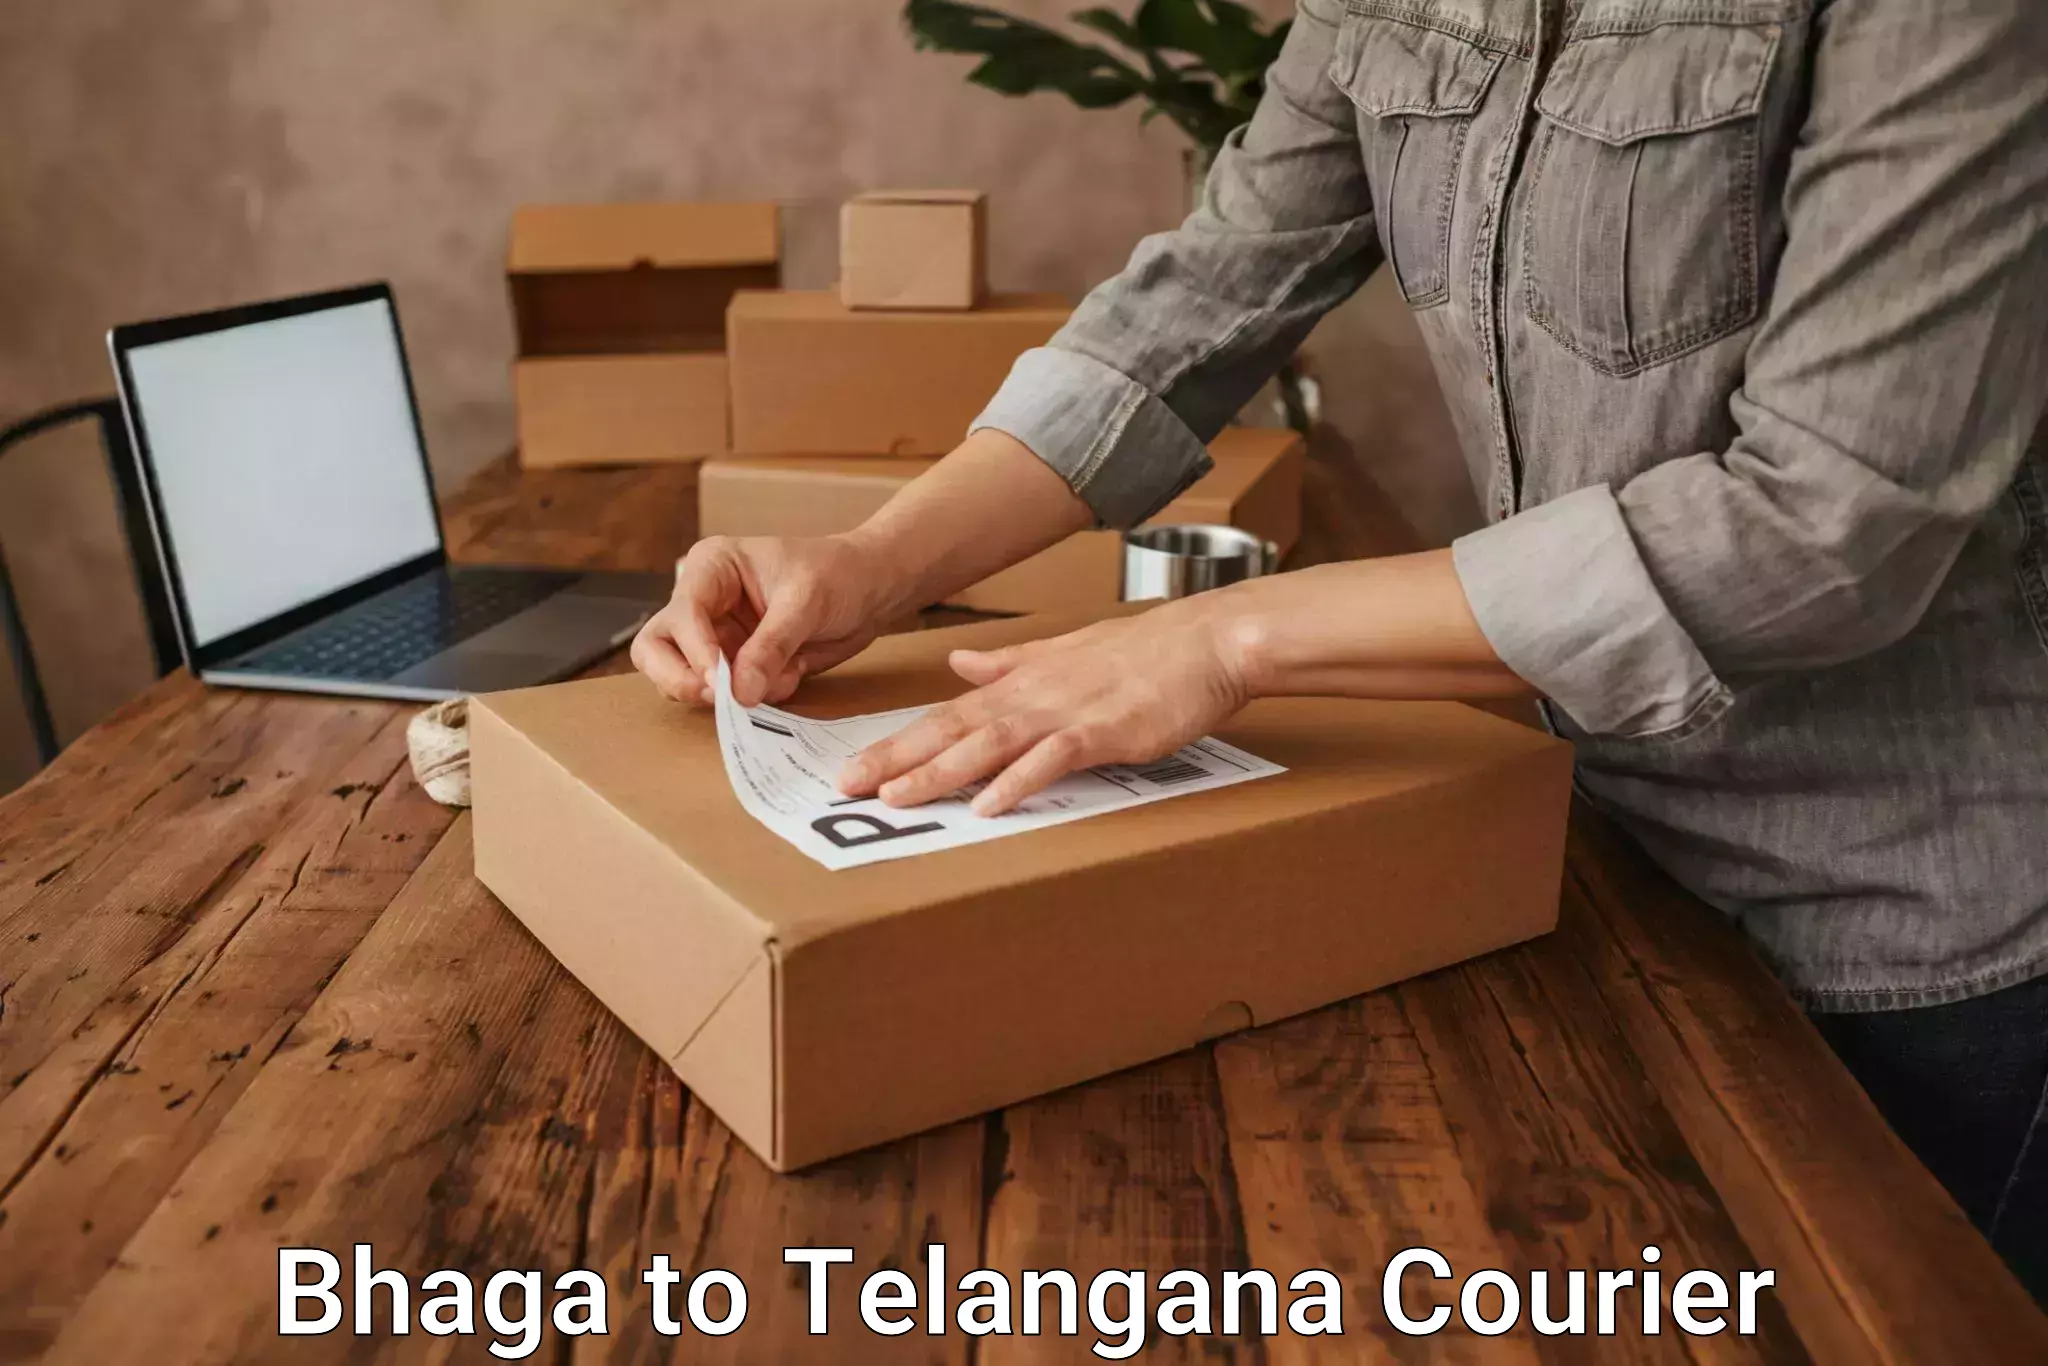 Overnight delivery services Bhaga to Manneguda